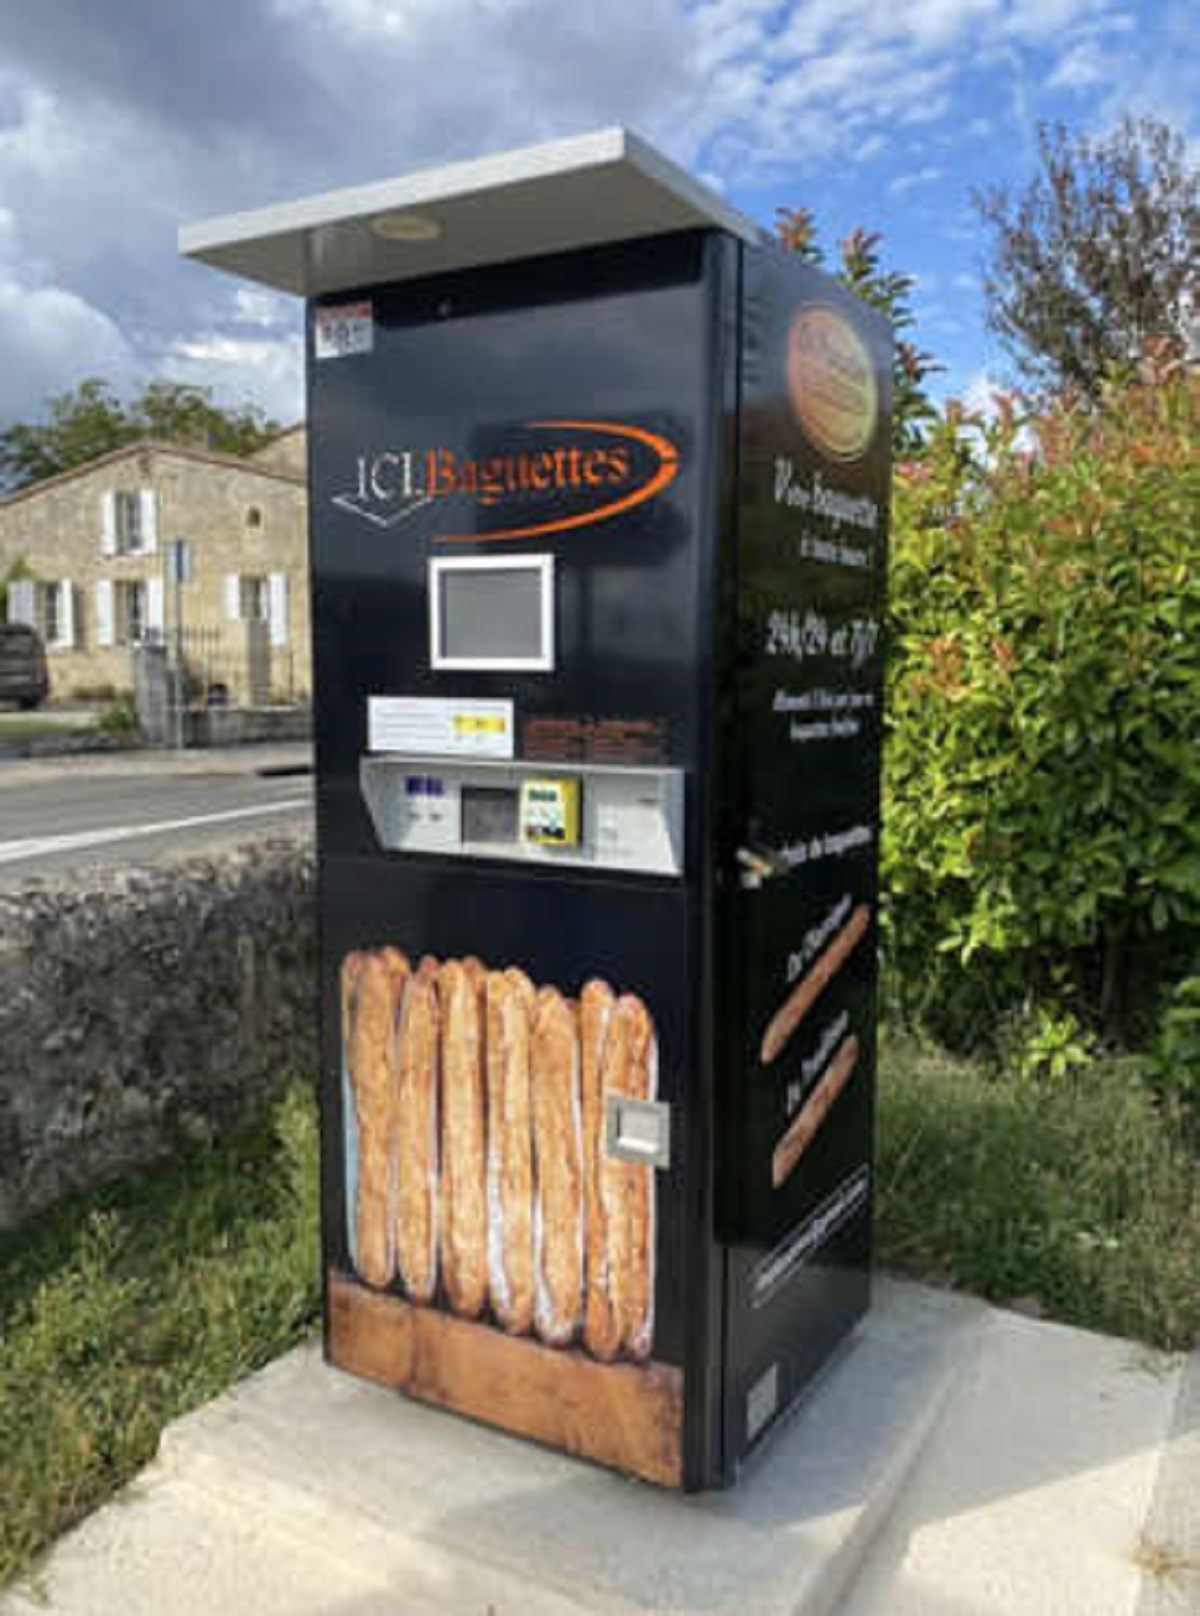 You wanted a baguette in France? Baguette vending machines in France.